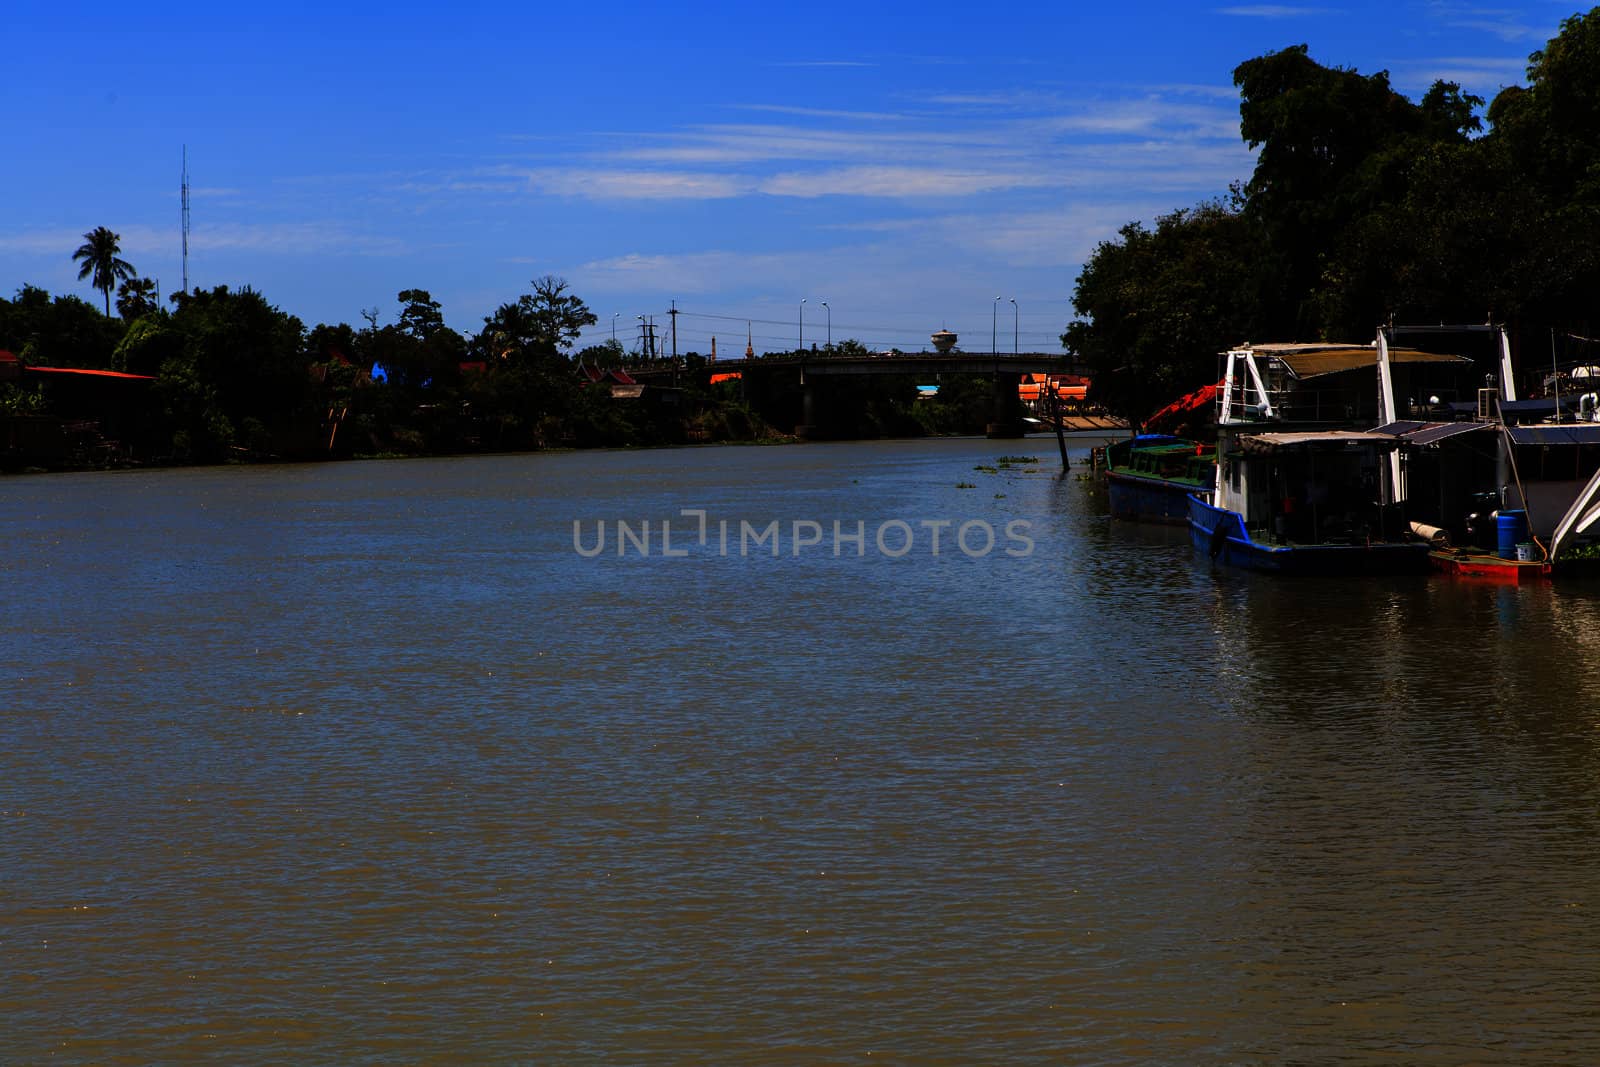 summer landscape with river and blue sky  take photo from river.